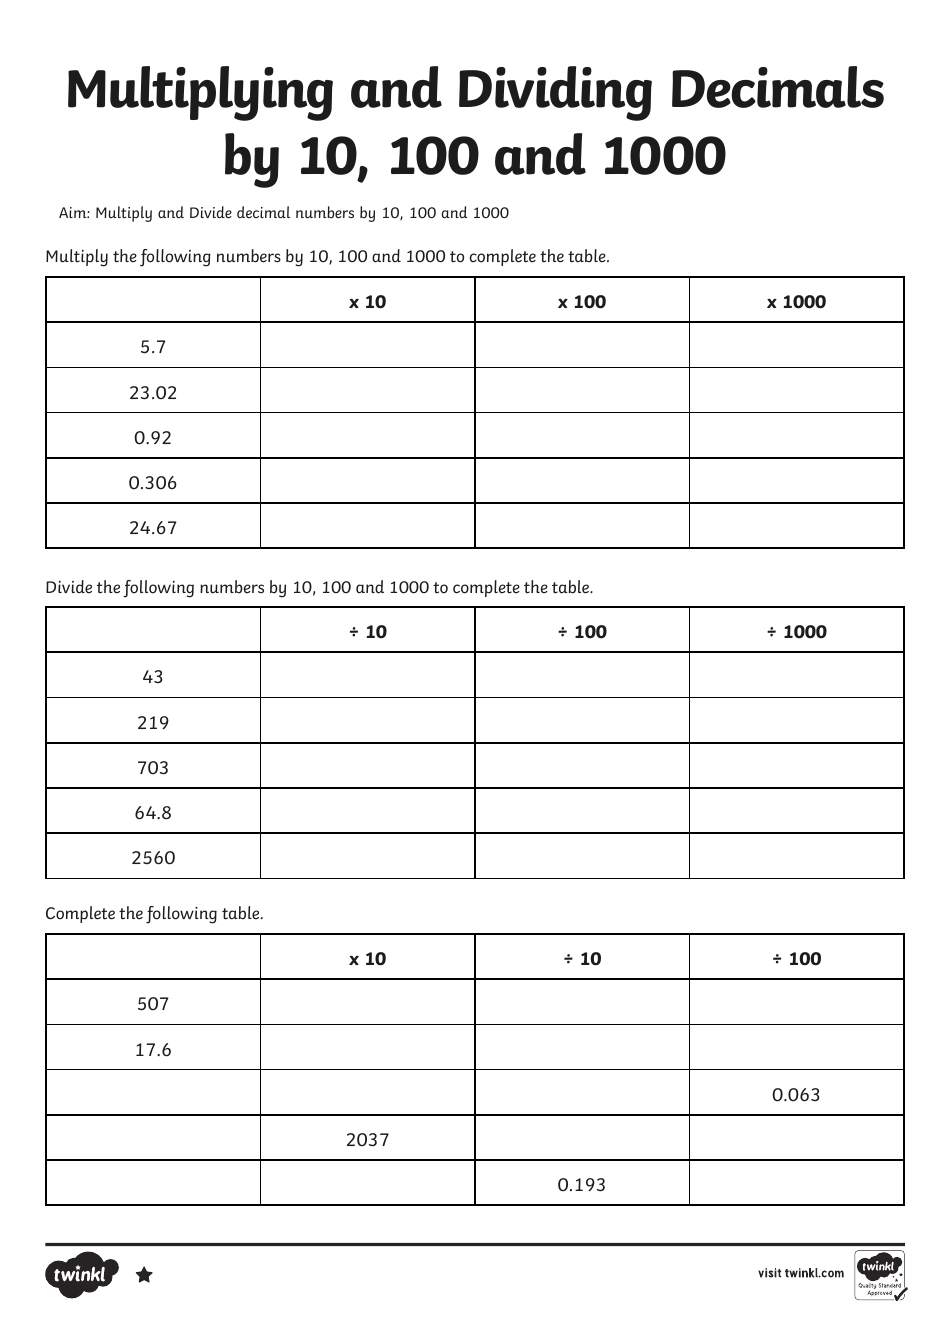 Math Worksheet - Multiplying and Dividing Decimals by 10, 100 and 1000, Page 1